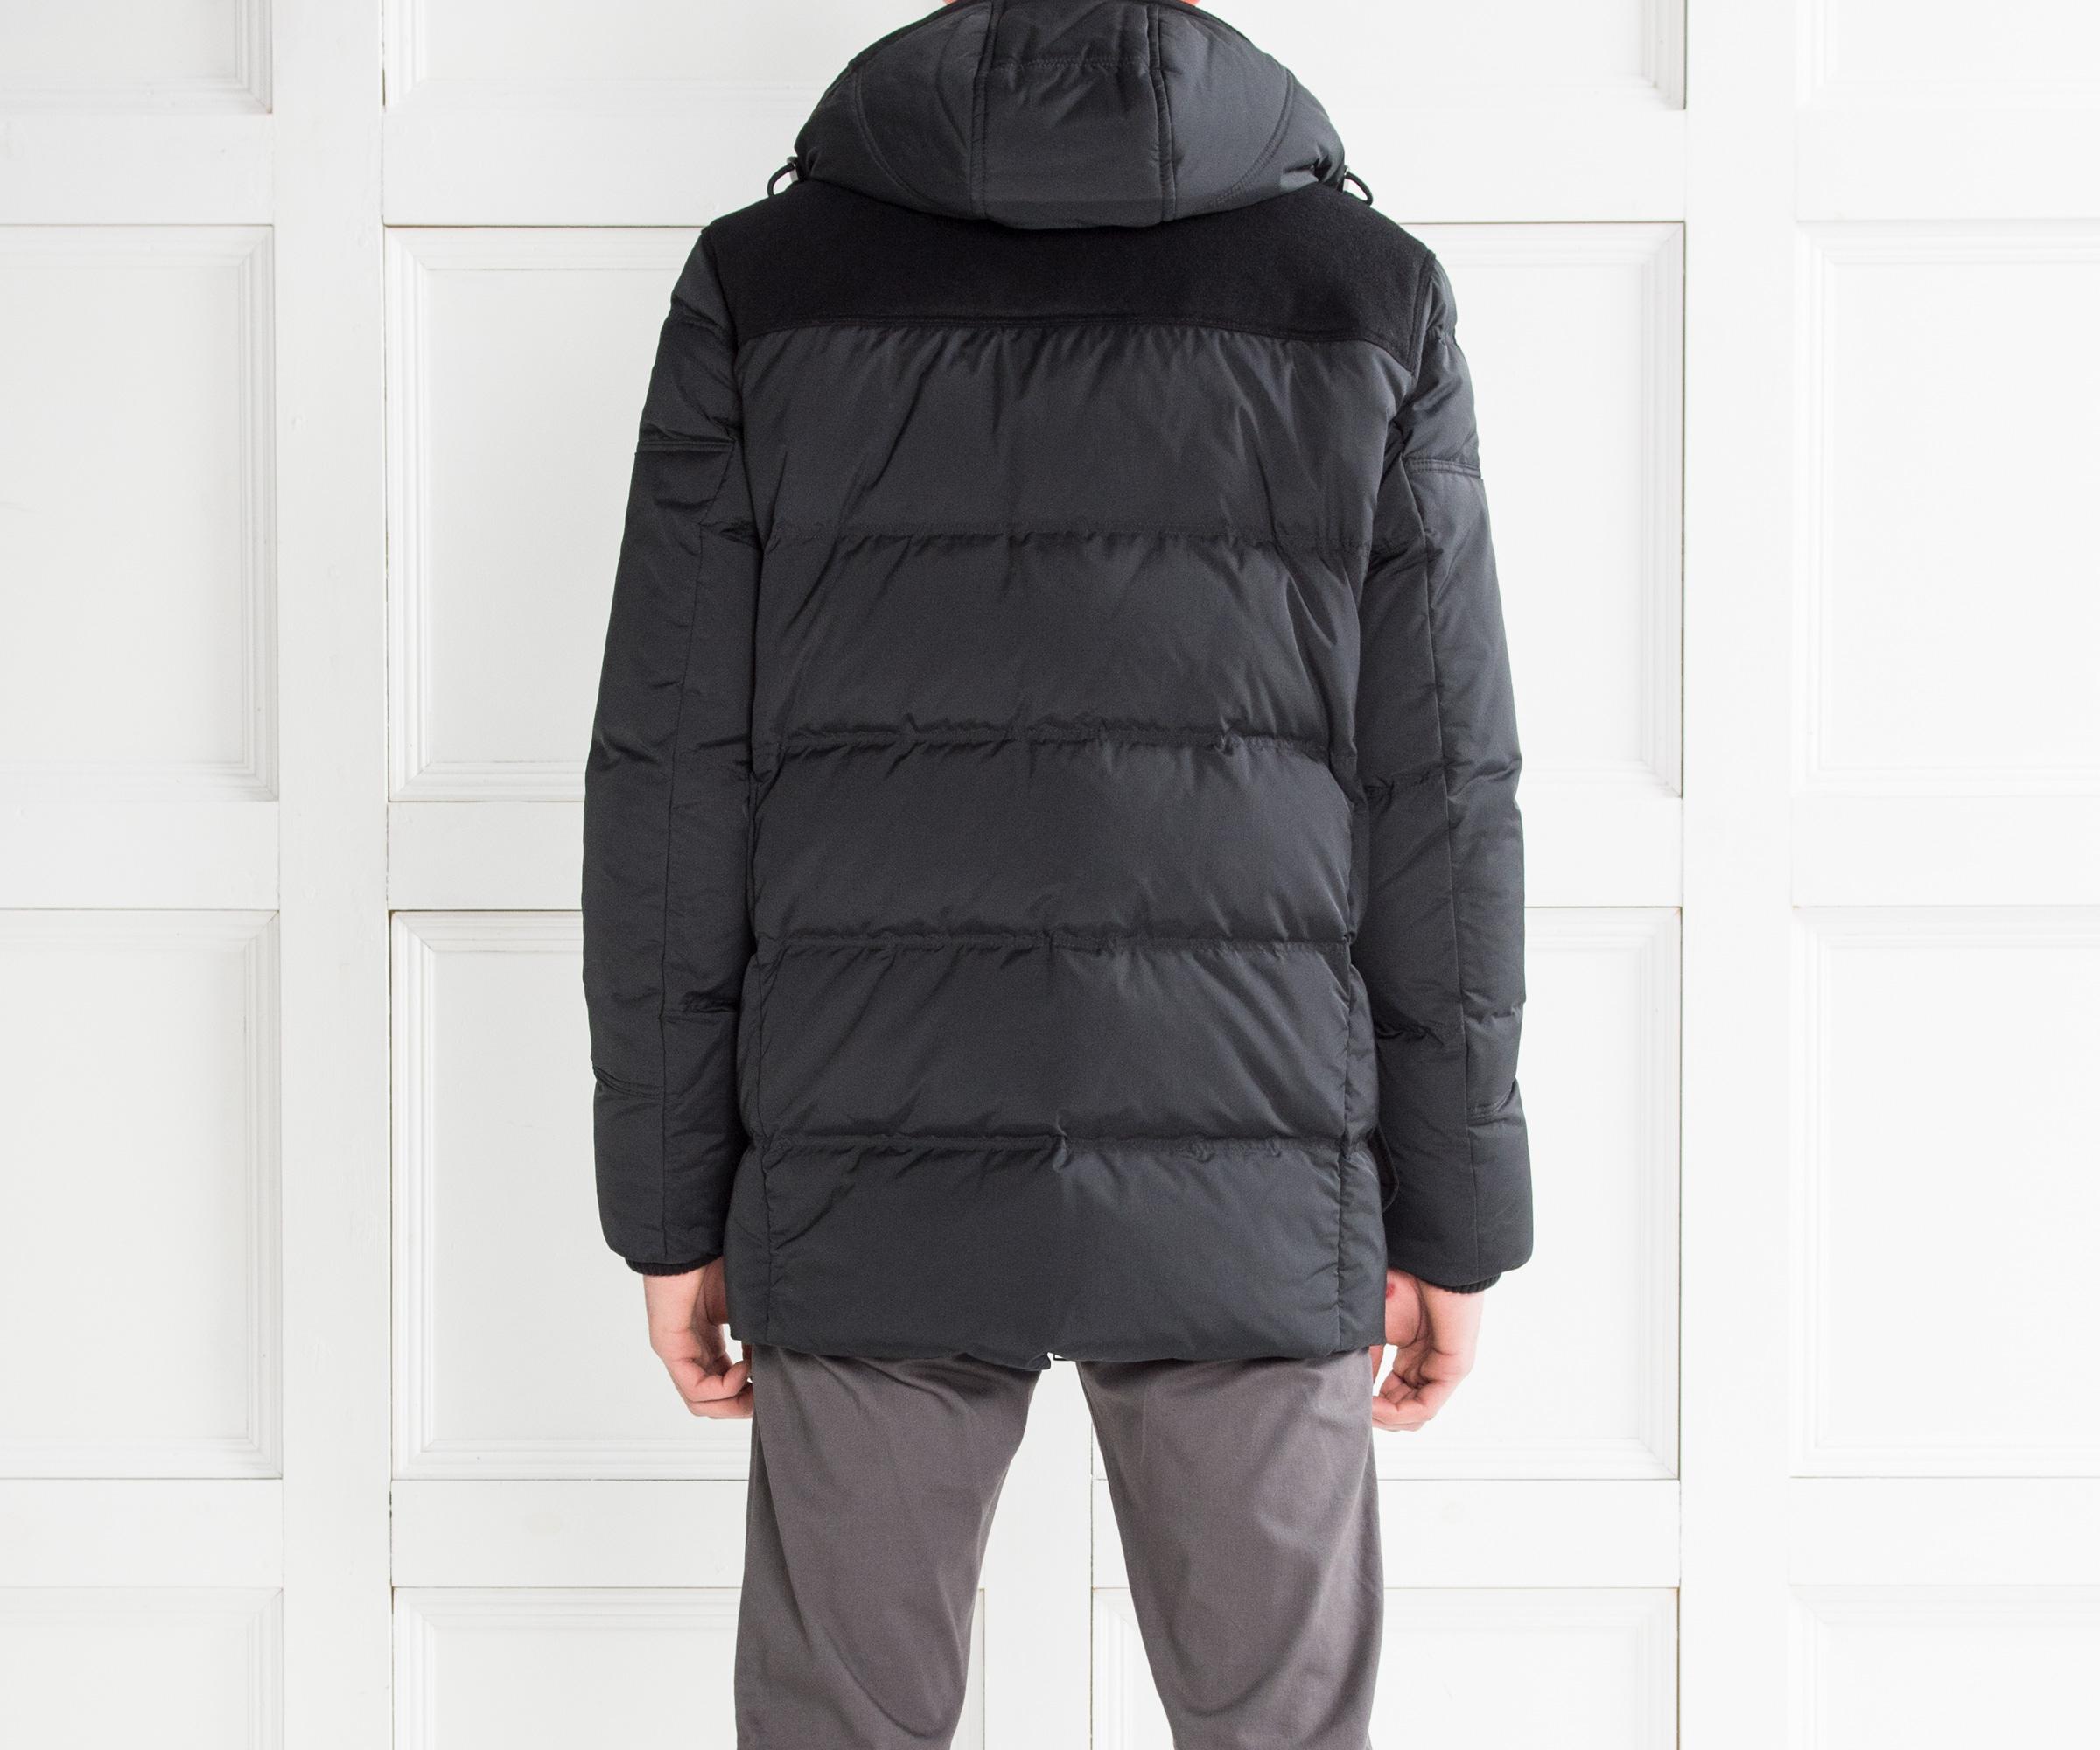 BOSS Wool 'donnie' Down Jacket Black for Men - Lyst